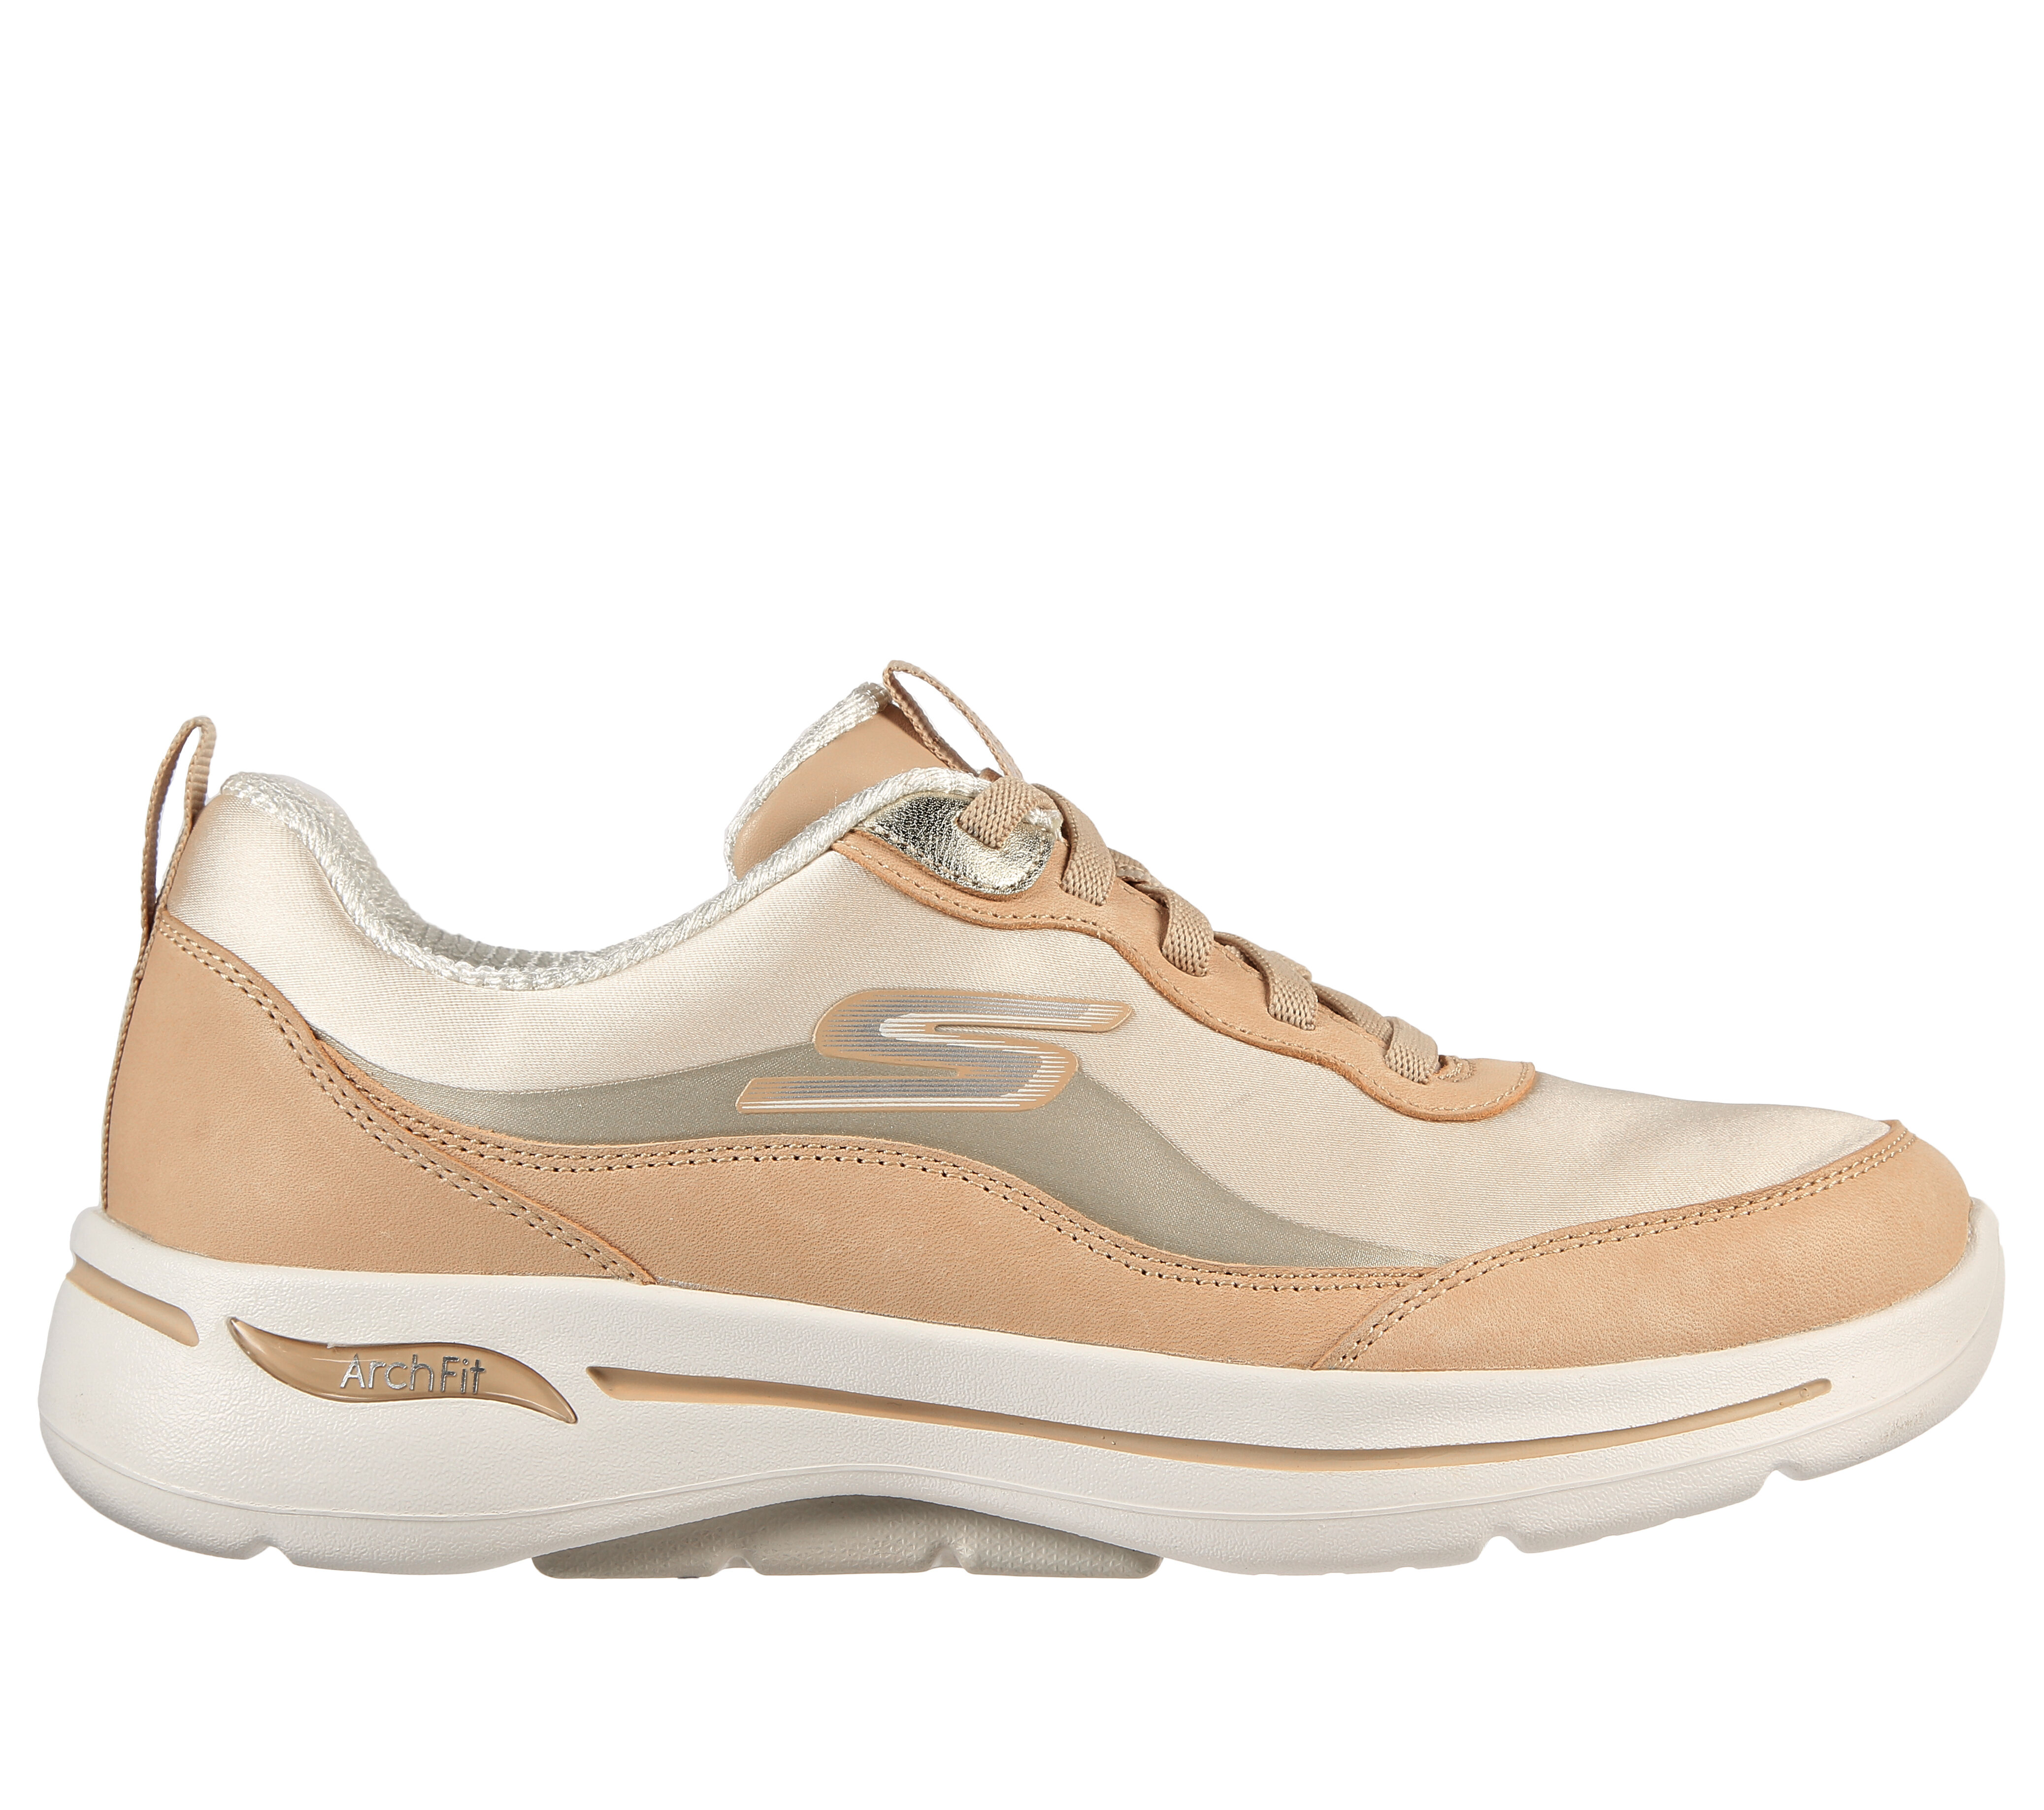 sketchers white shoes for women